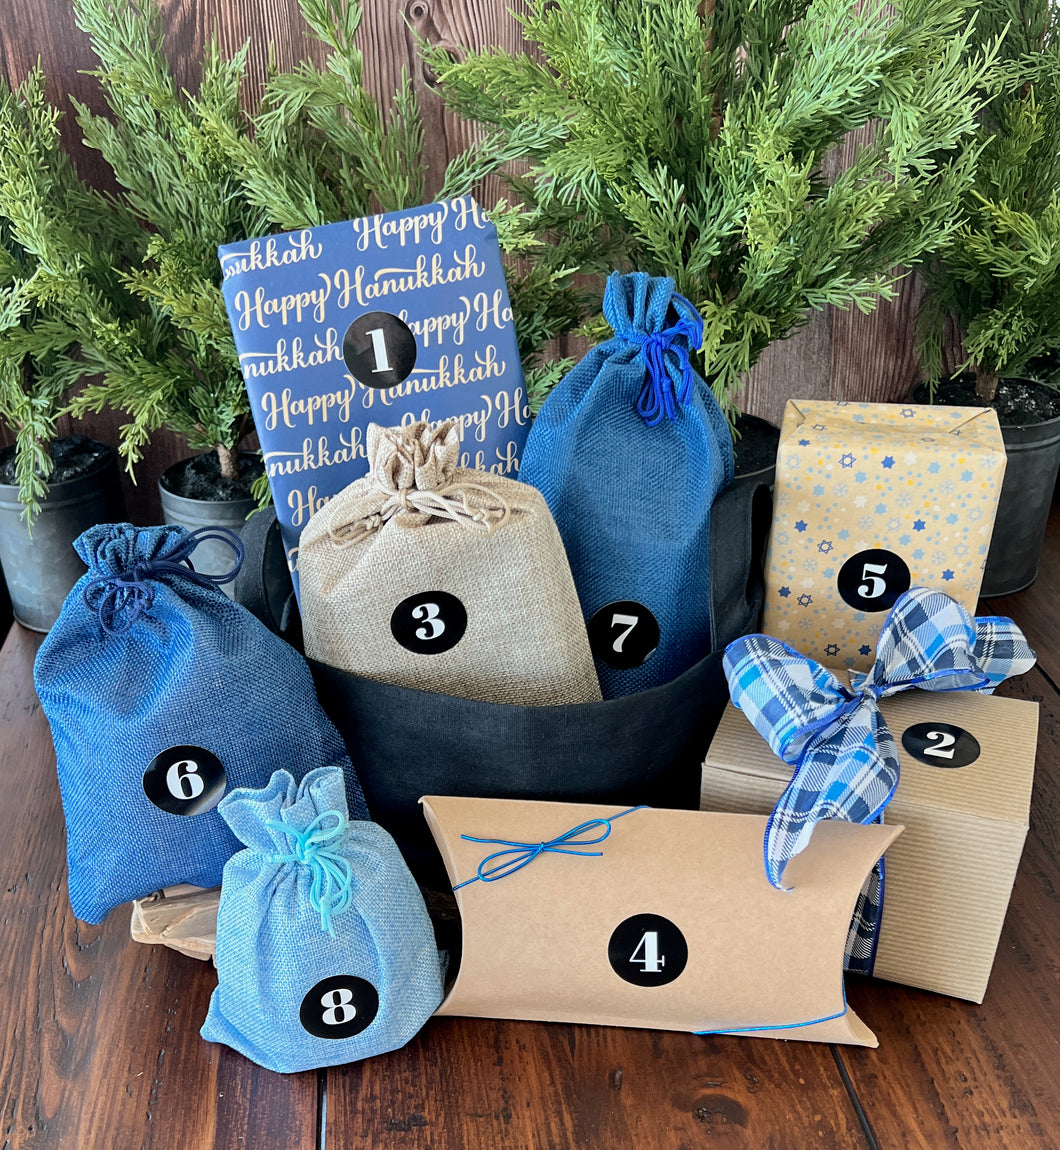 8 Crazy Nights!  A Surprise Collection of 8 Local Gifts for Hanukkah